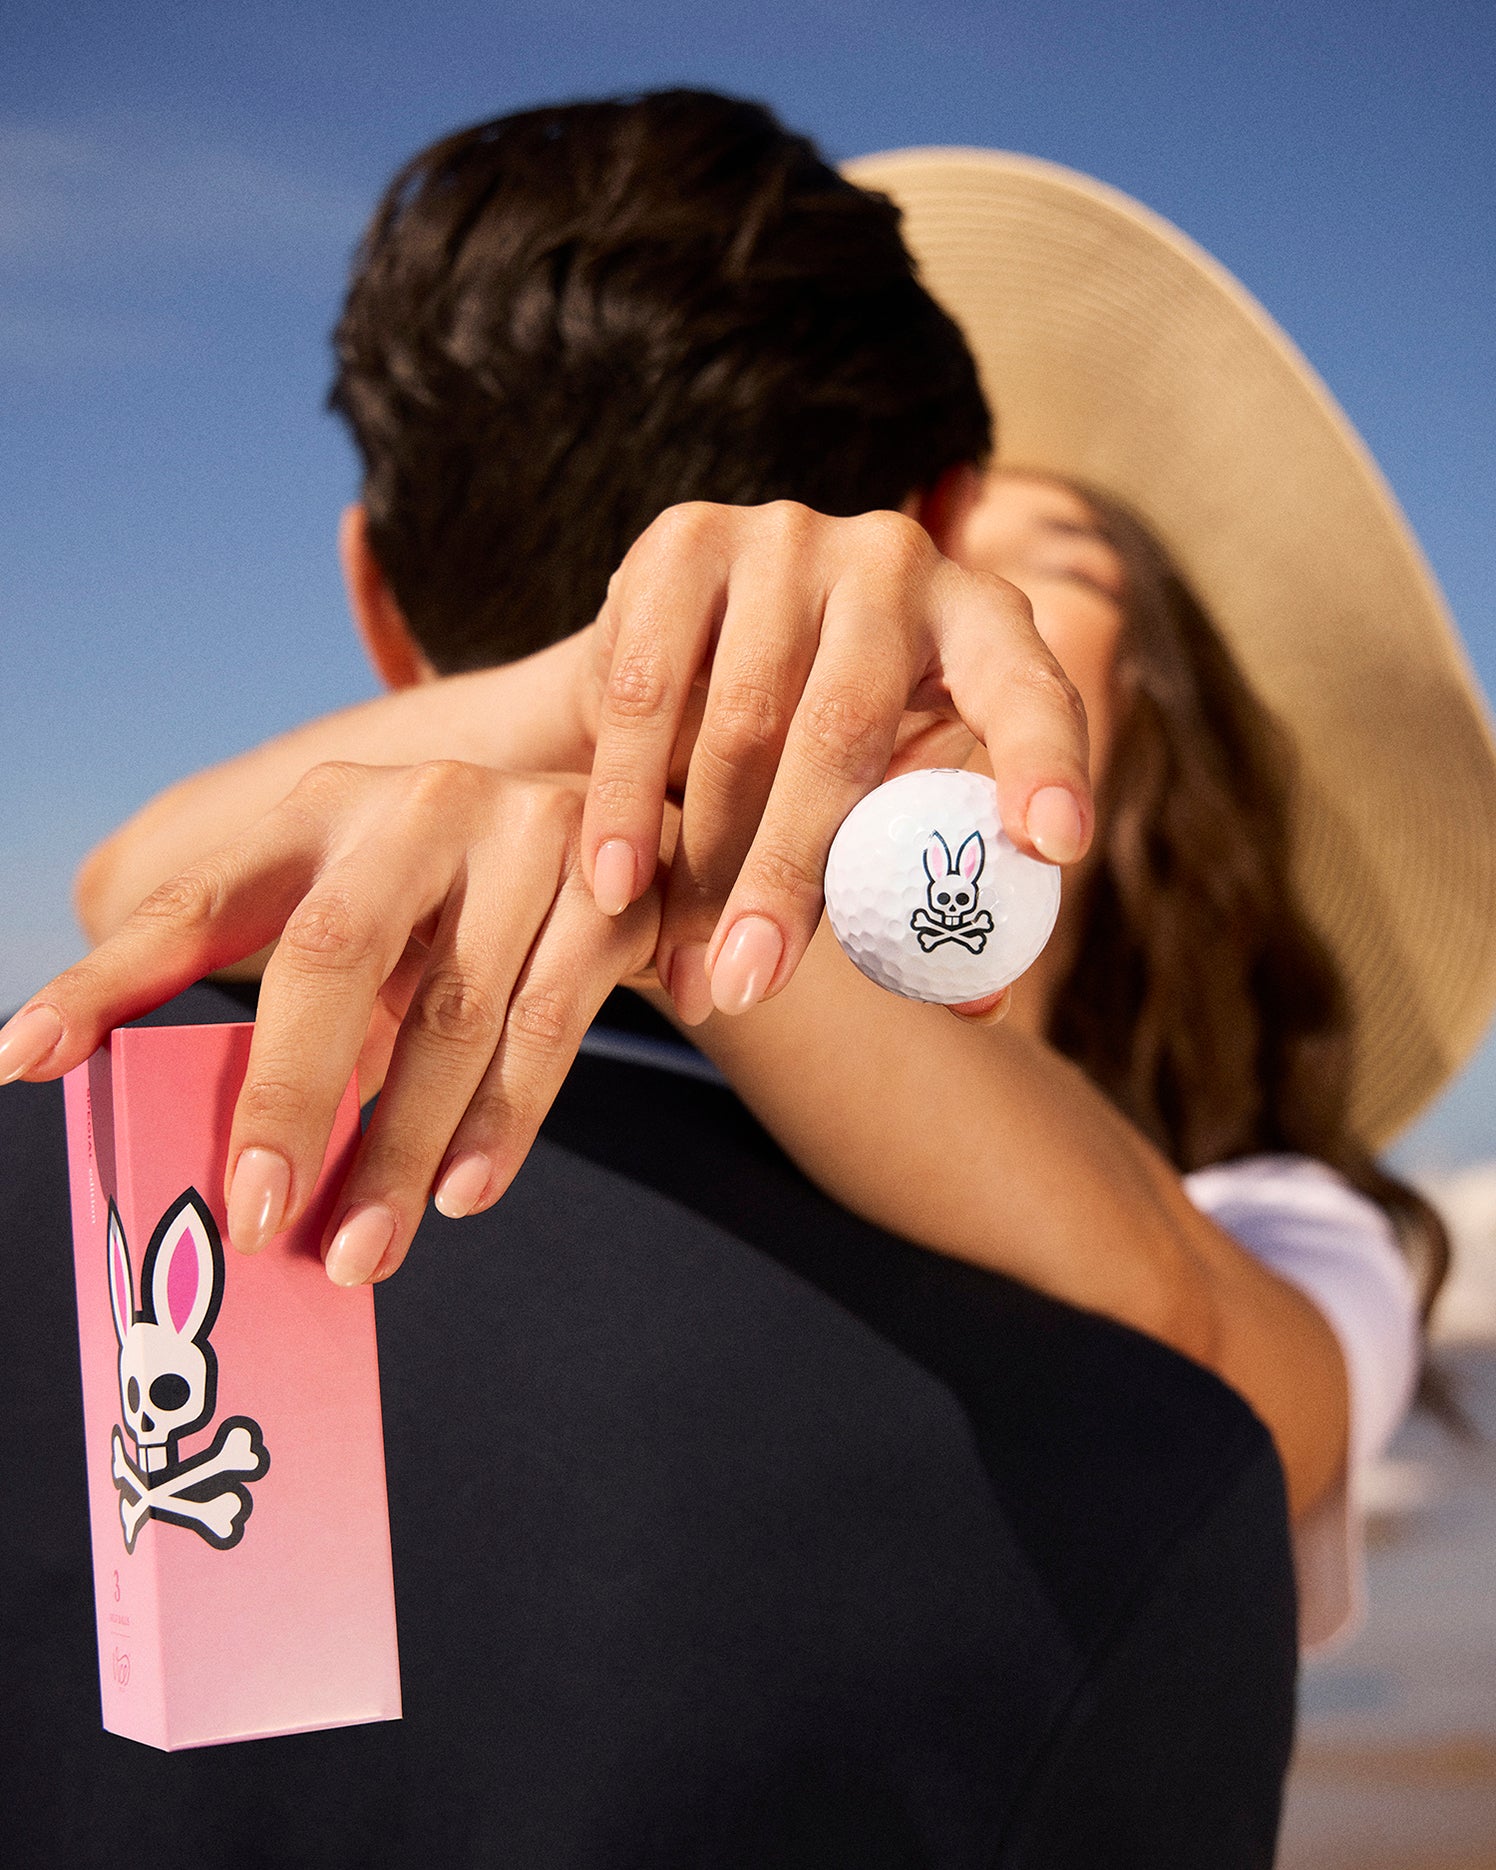 A woman with a wide-brim hat embraces a man, holding a pink box and a sleeve of 3 PACK GOLF BALLS - B6A565C200 featuring the Psycho Bunny logo. The background boasts a clear blue sky while the man's back is towards the camera, subtly showcasing gear designed to minimize driver spin.